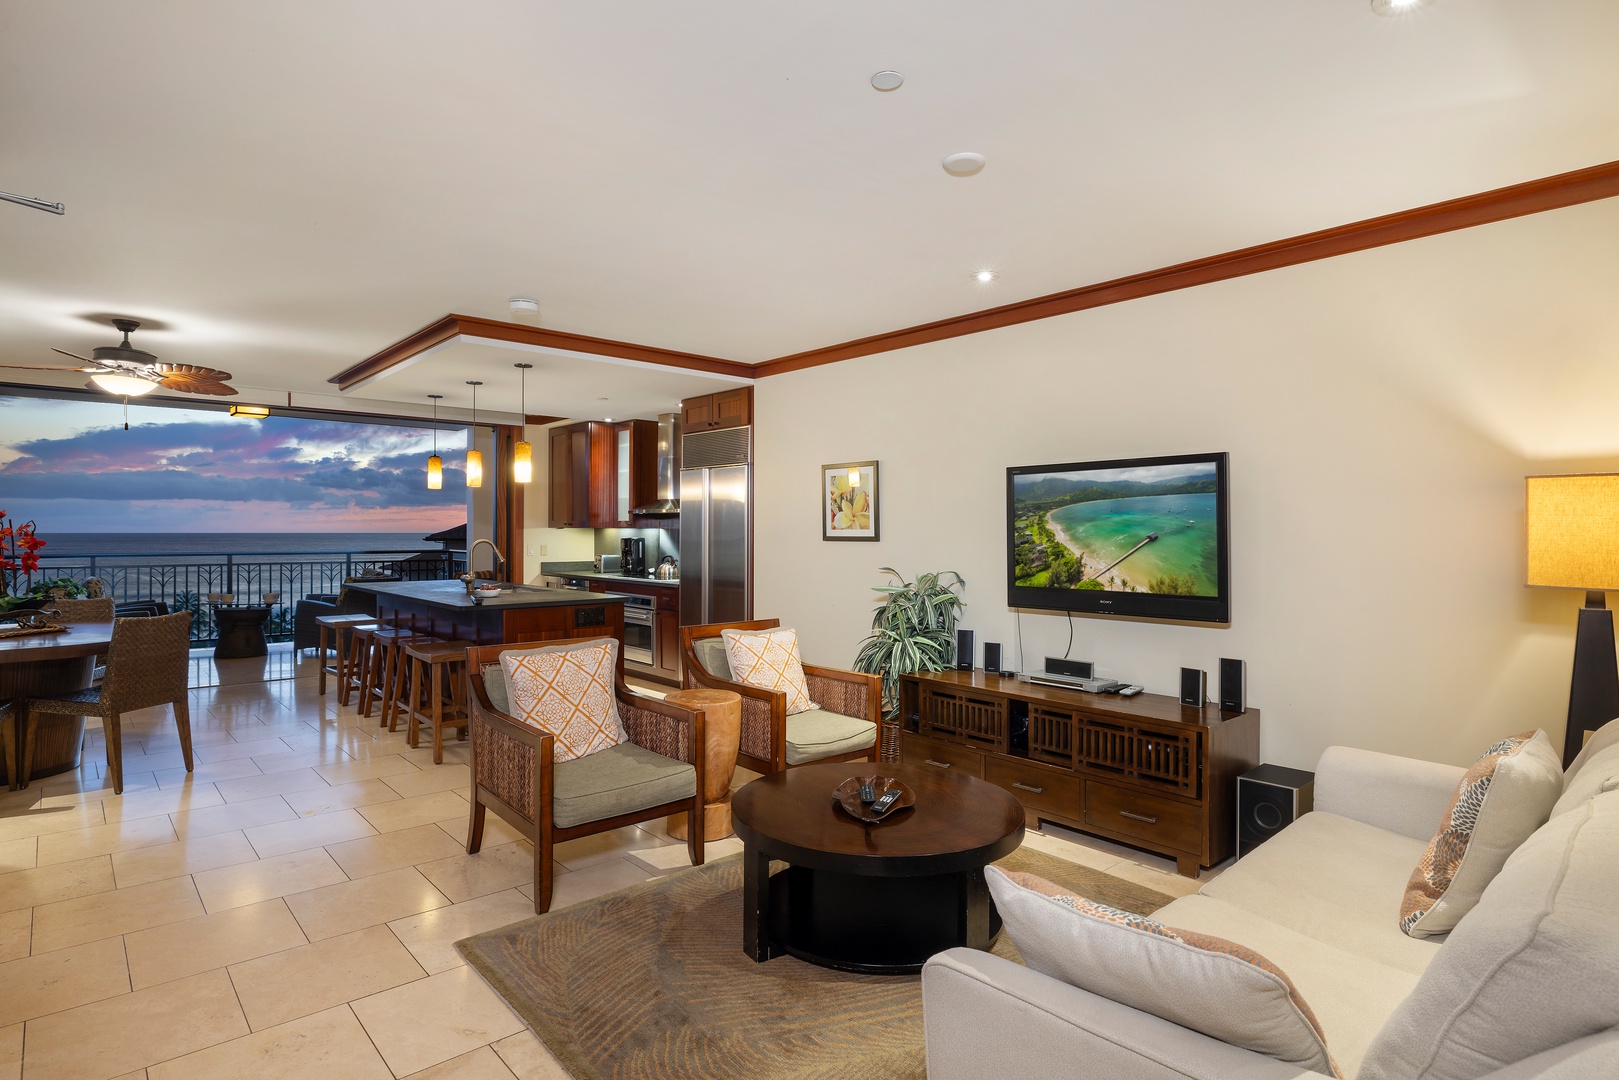 Kapolei Vacation Rentals, Ko Olina Beach Villas O1006 - Elegant open-concept living with dining and lounge areas, overlooking a stunning twilight ocean view.